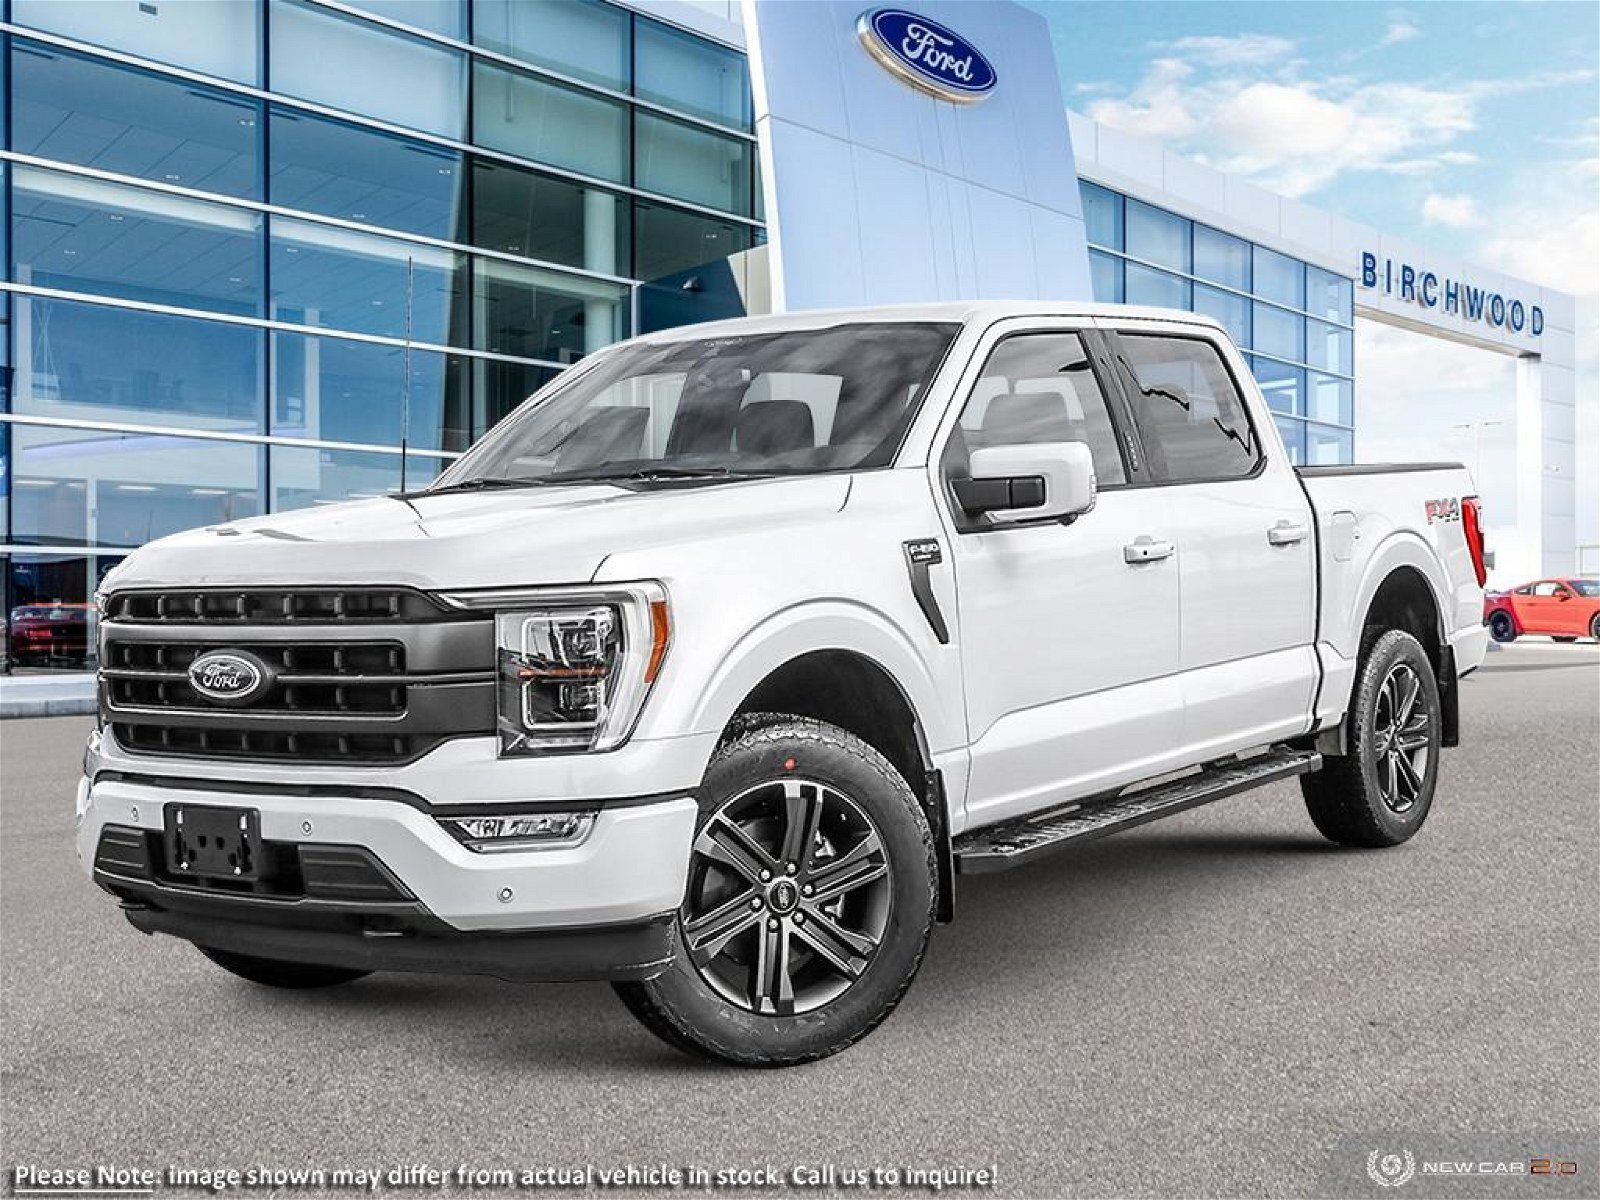 2023 Ford F-150 LARIAT DEMO Blowout - $16996 OFF